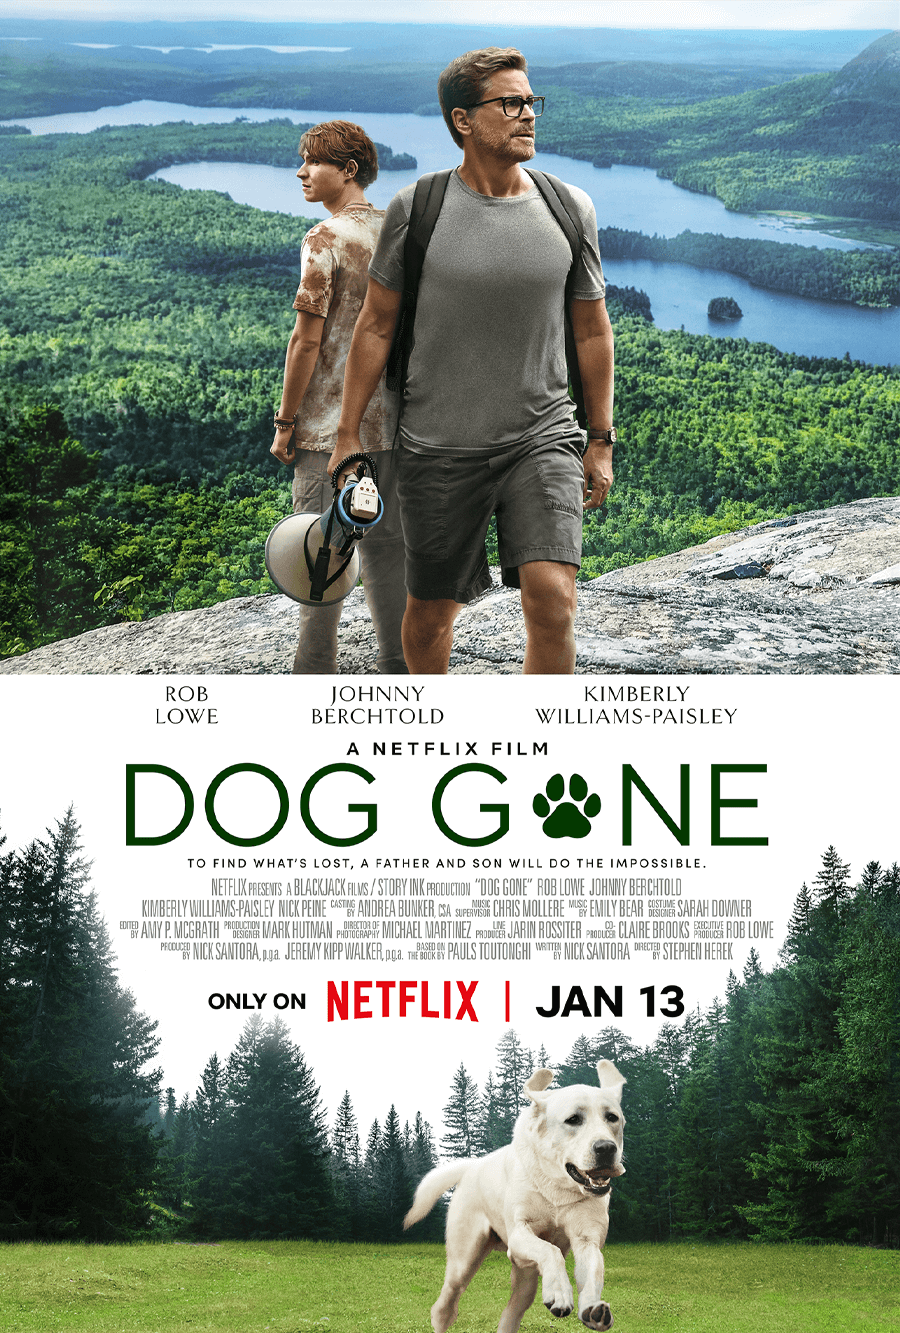 Dog Gone Netflix Movie Coming To Netflix Poster In January 2023